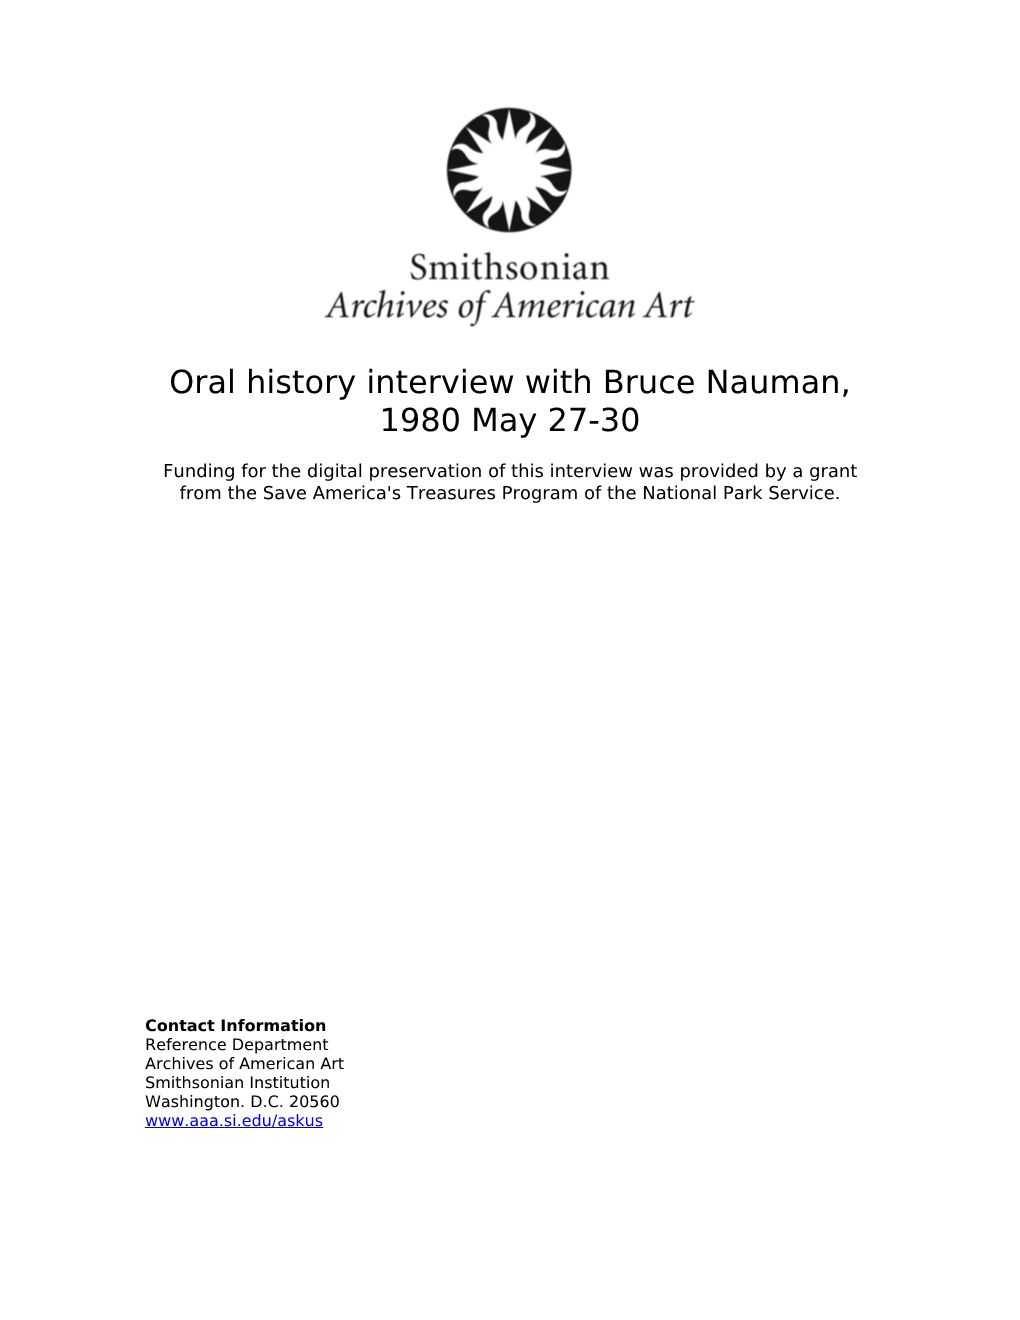 Oral History Interview with Bruce Nauman, 1980 May 27-30